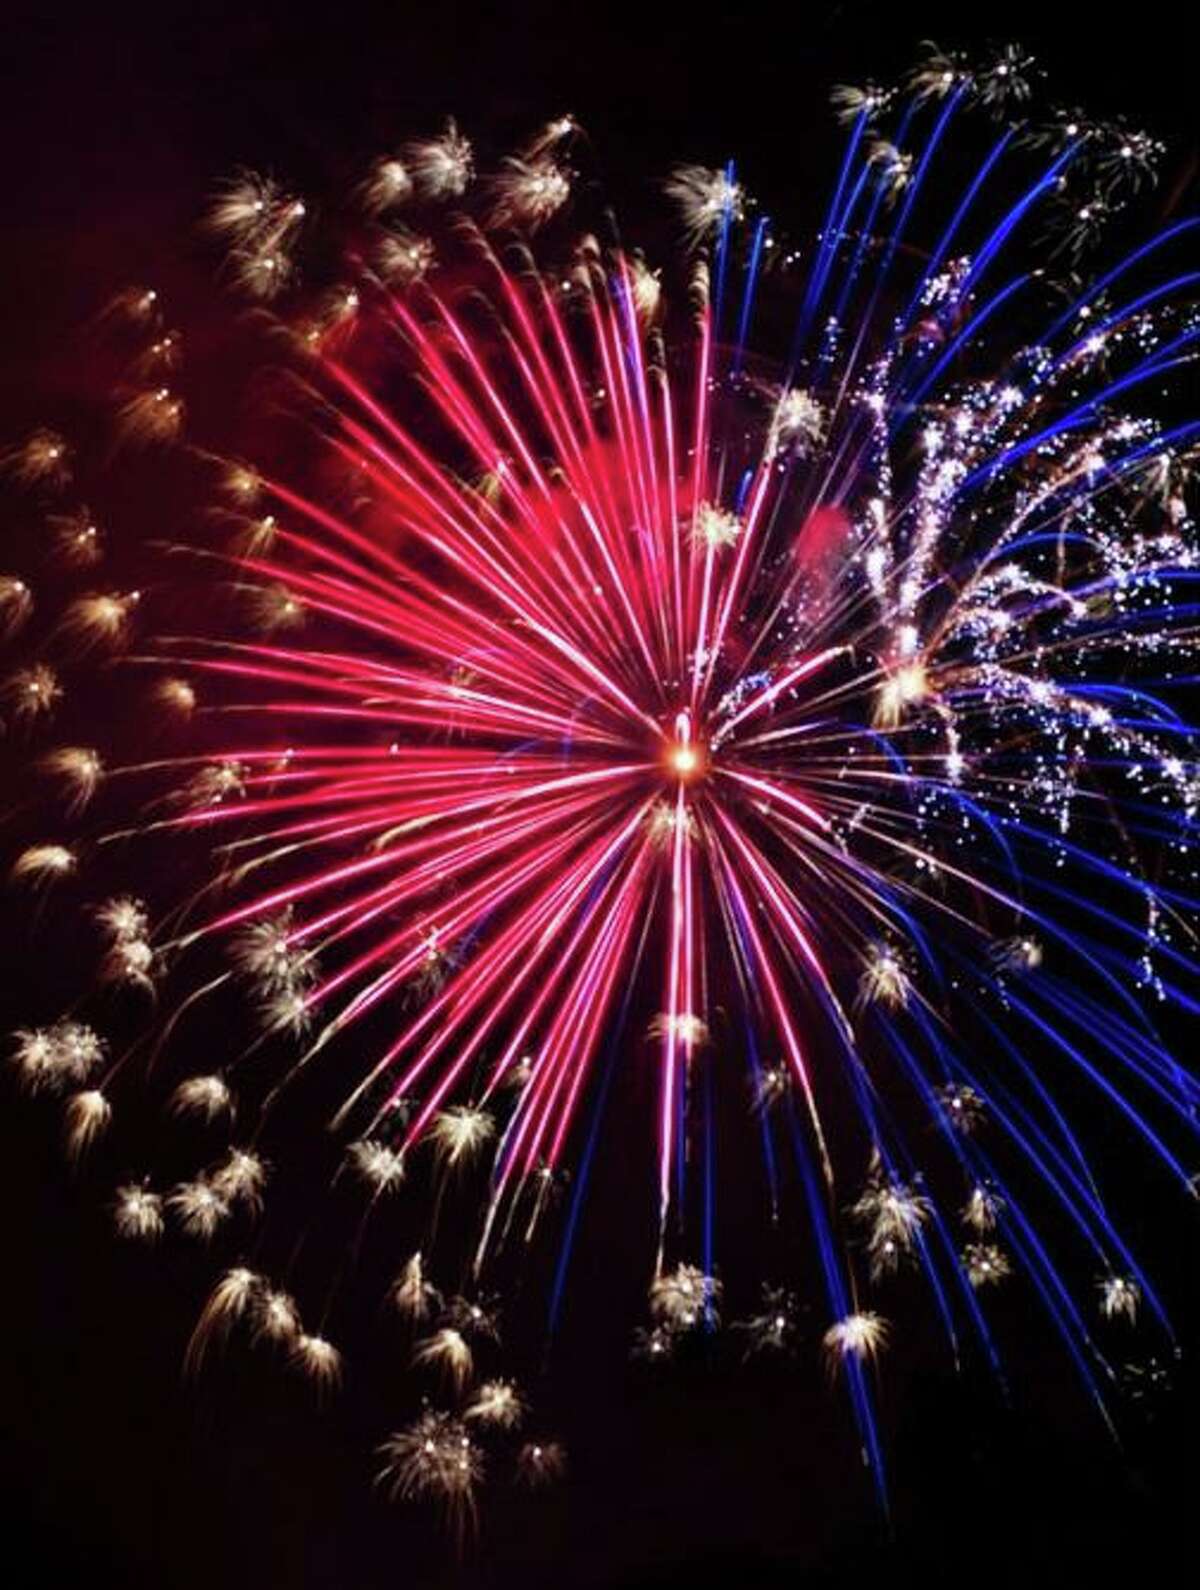 The city of Sugar Land is presenting its annual Red, White and Boom festivities for area residents as part of its Fourth of July celebration.